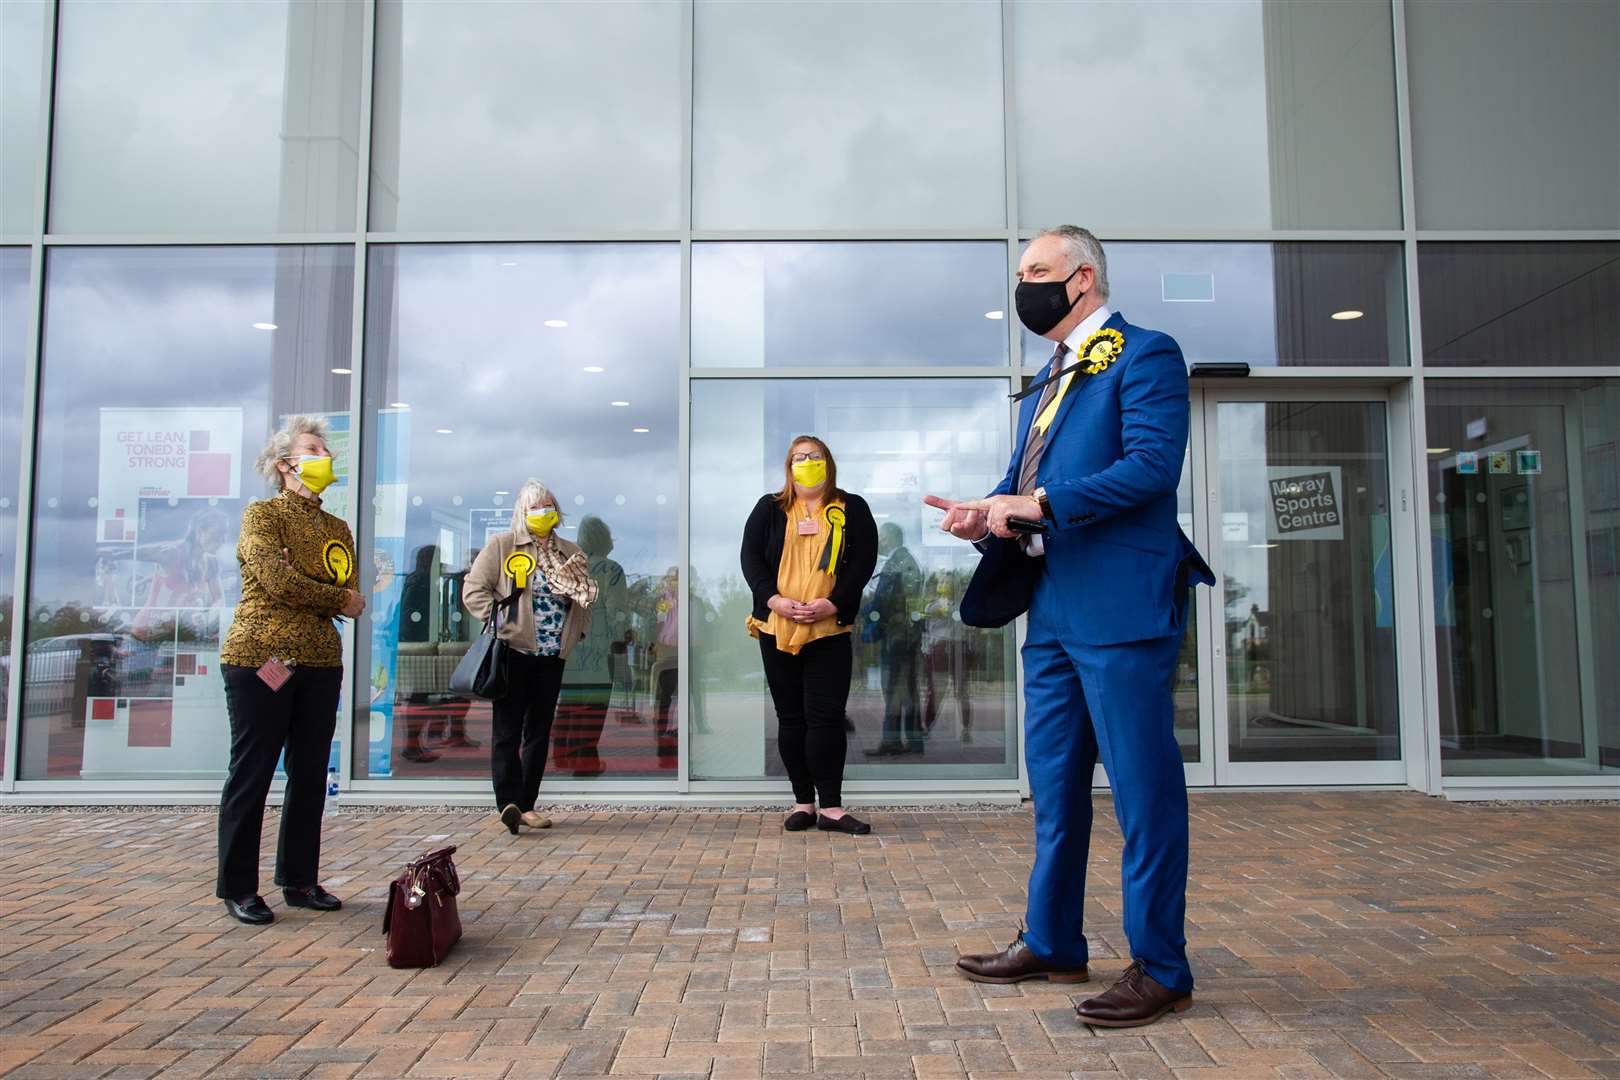 Richard Lochhead, Moray's SNP MSP, is greeted by his campaign team as he arrives at the Regional Count on Saturday morning following a period of precautionary self-isolation...Moray's 2021 Scottish Election...Picture: Daniel Forsyth.